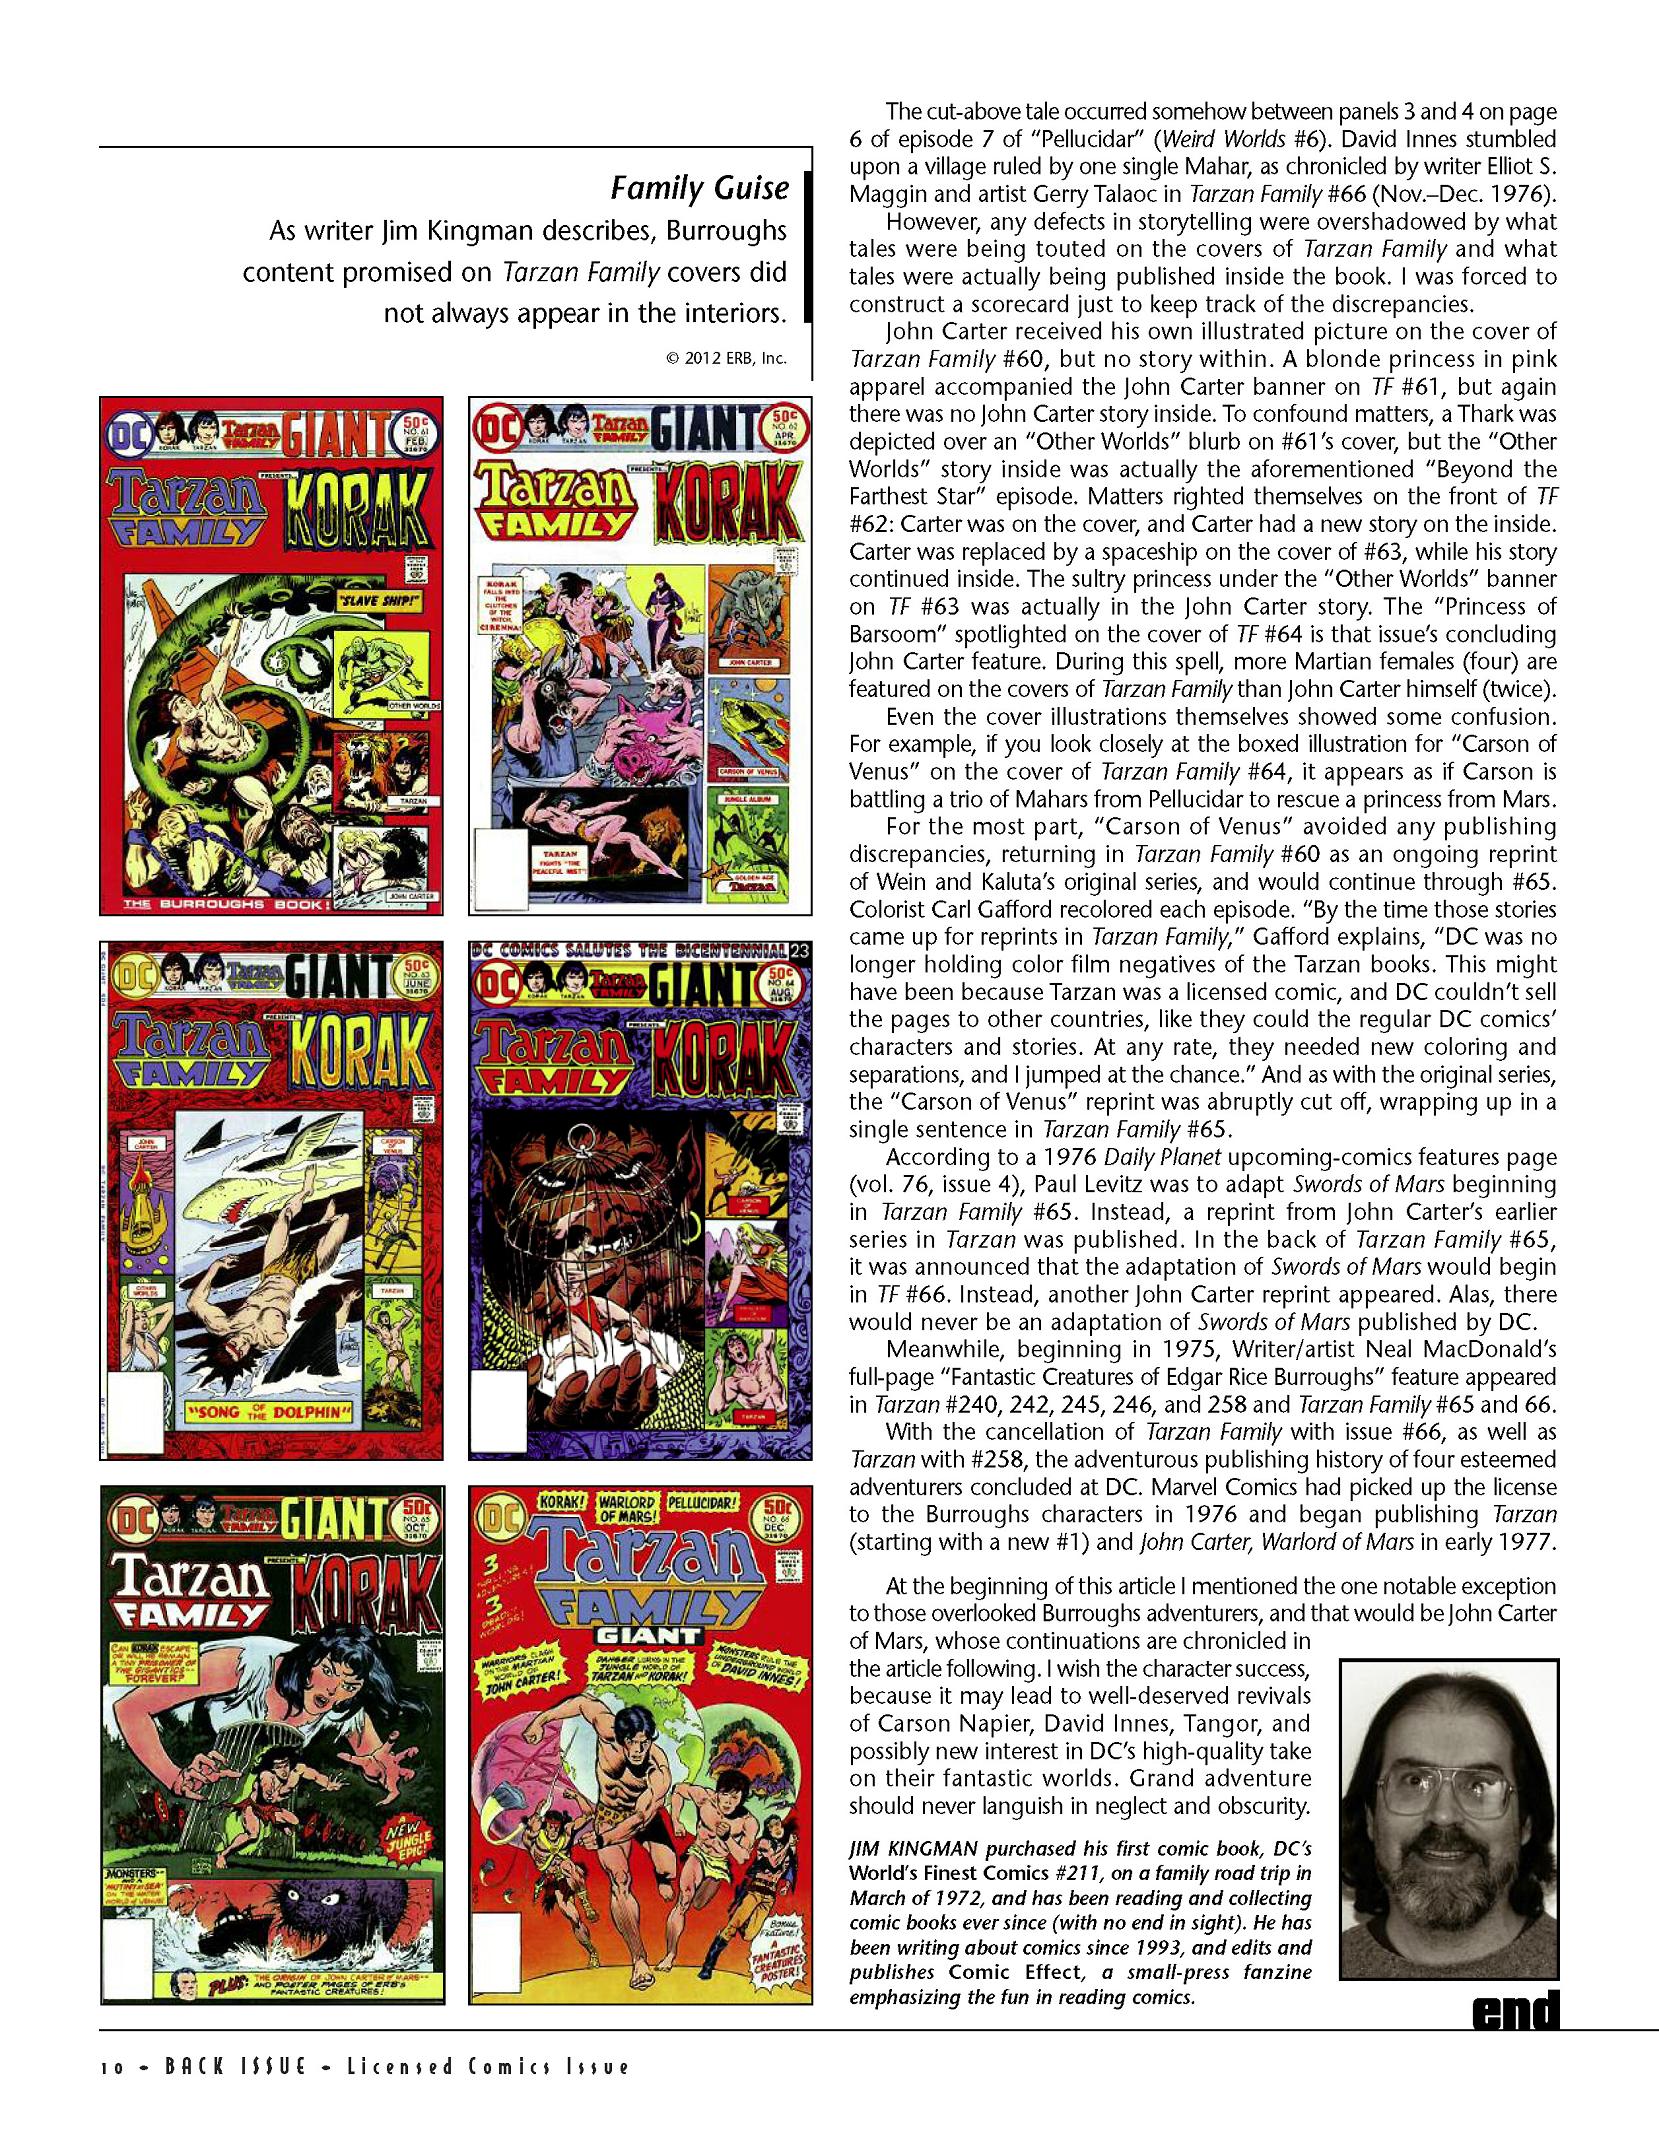 Read online Back Issue comic -  Issue #55 - 12